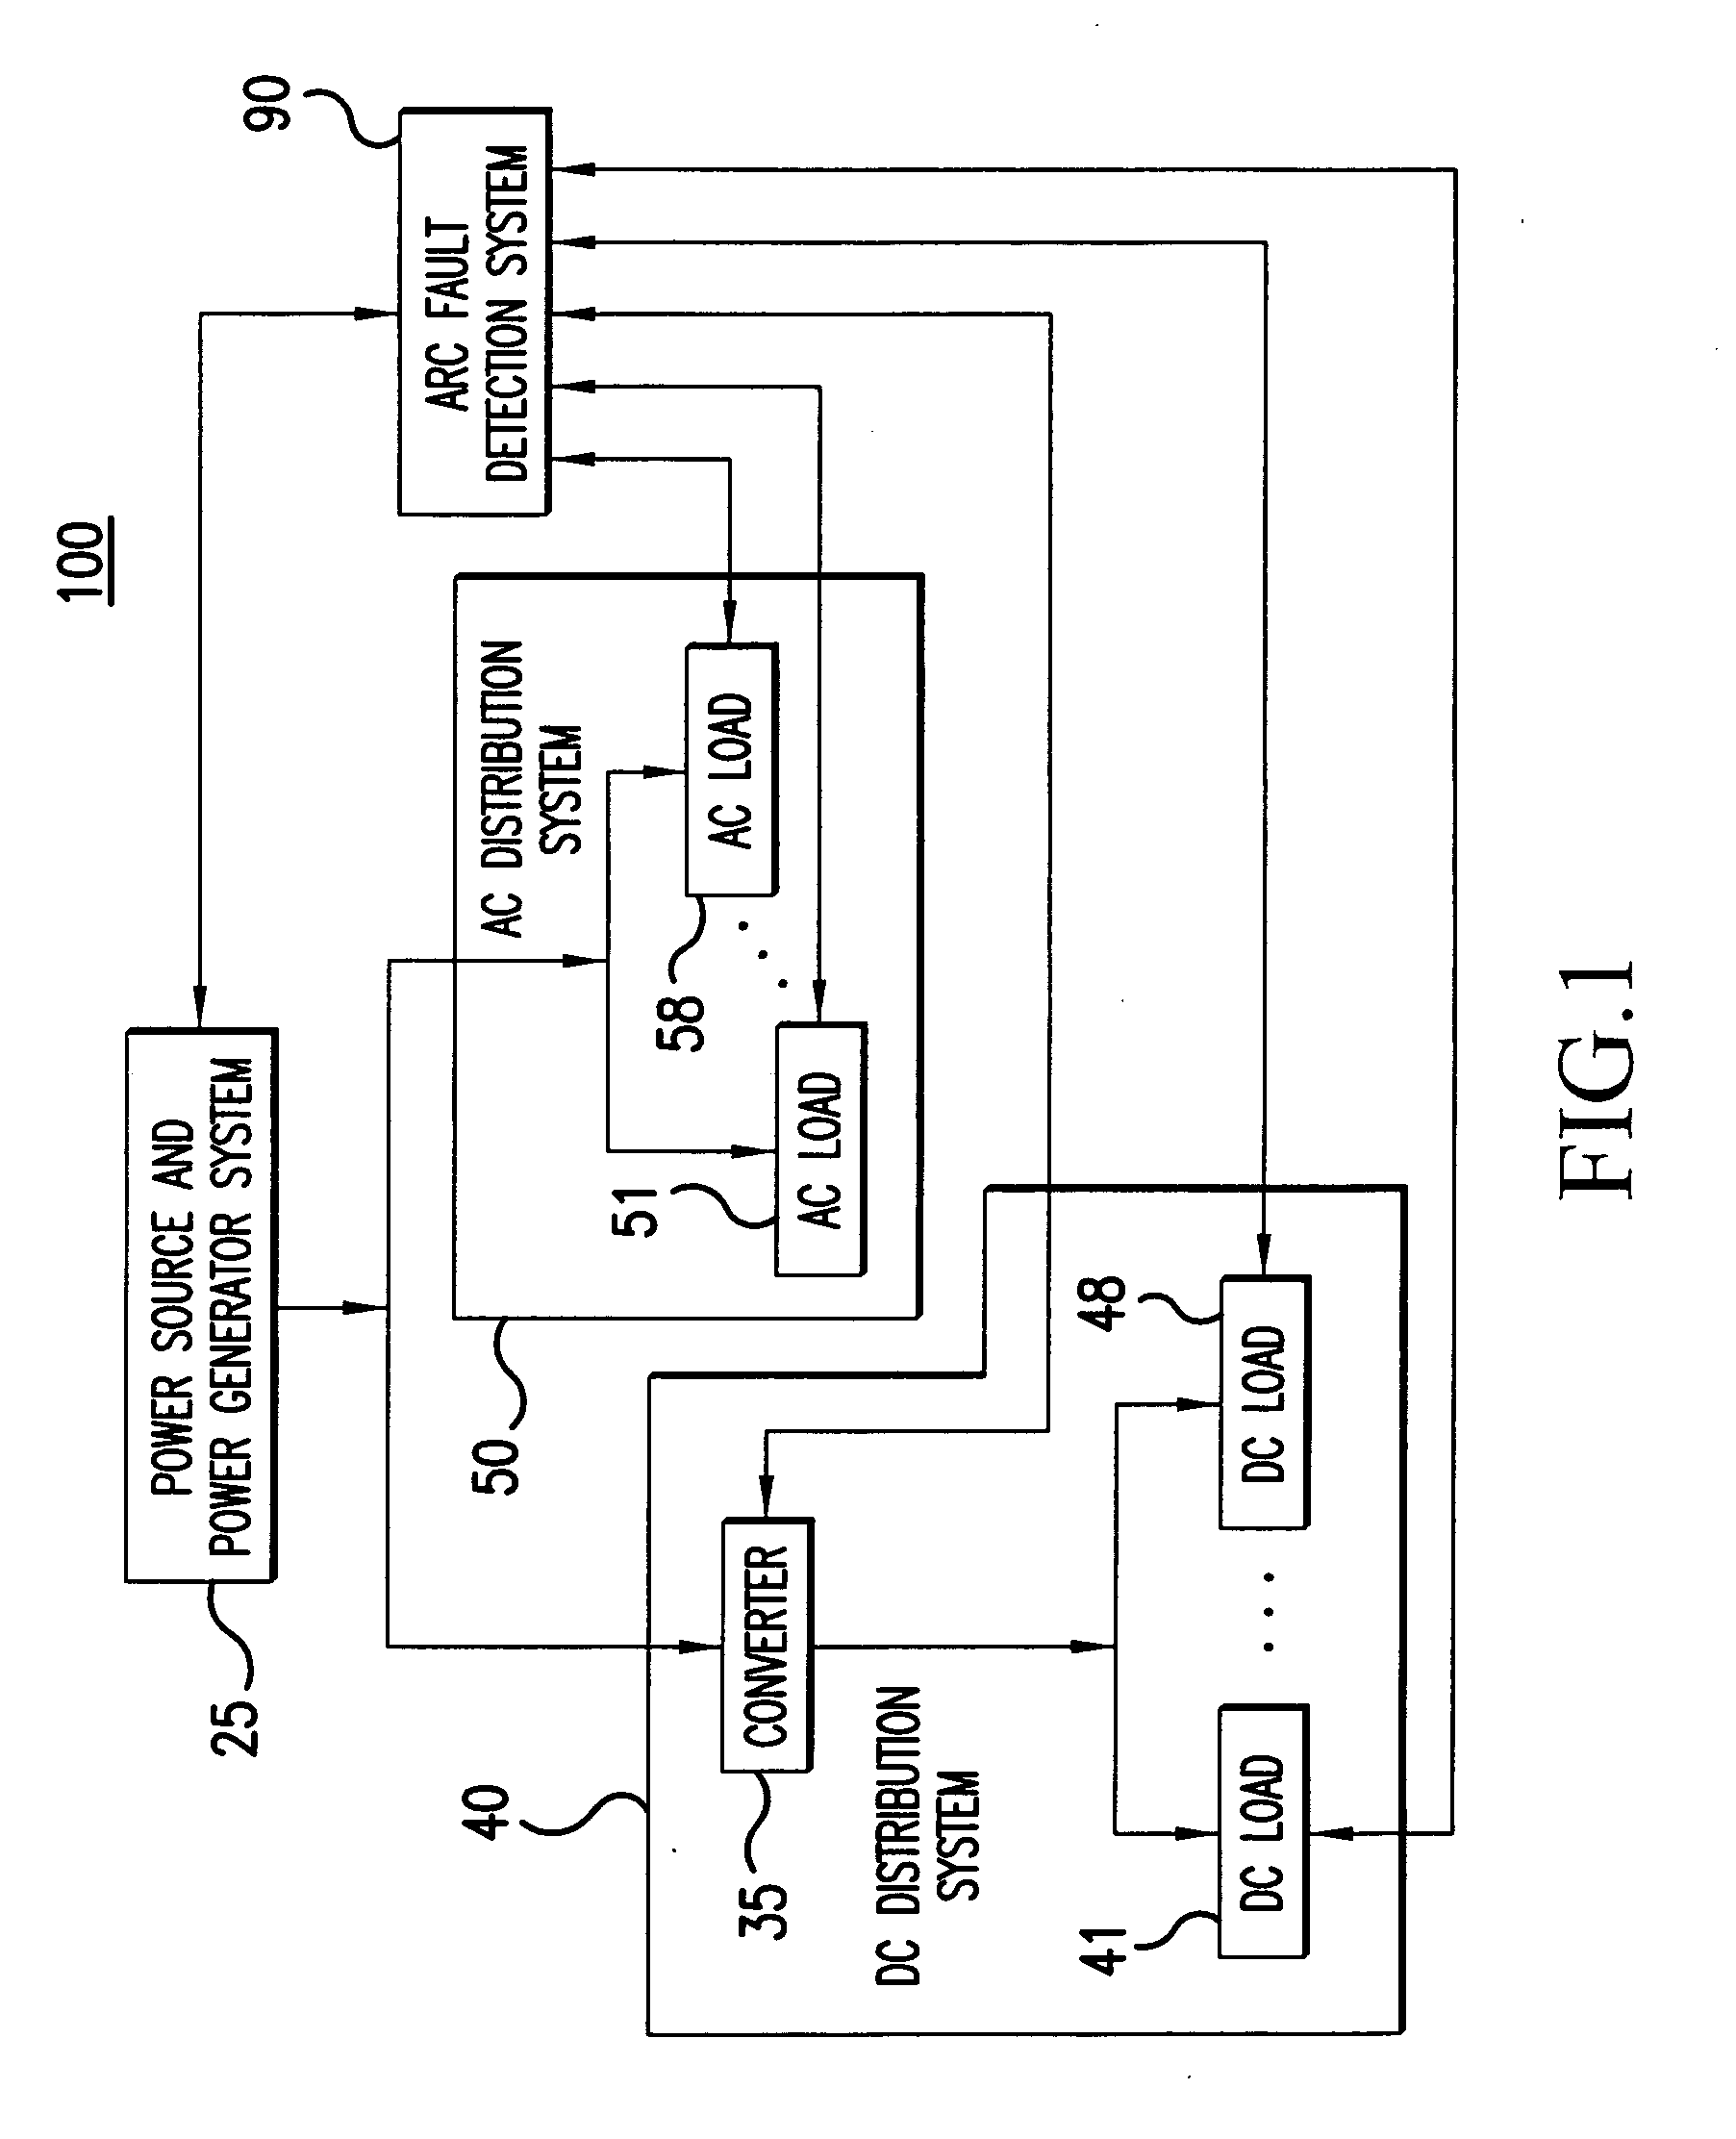 Method and apparatus for generalized arc fault detection